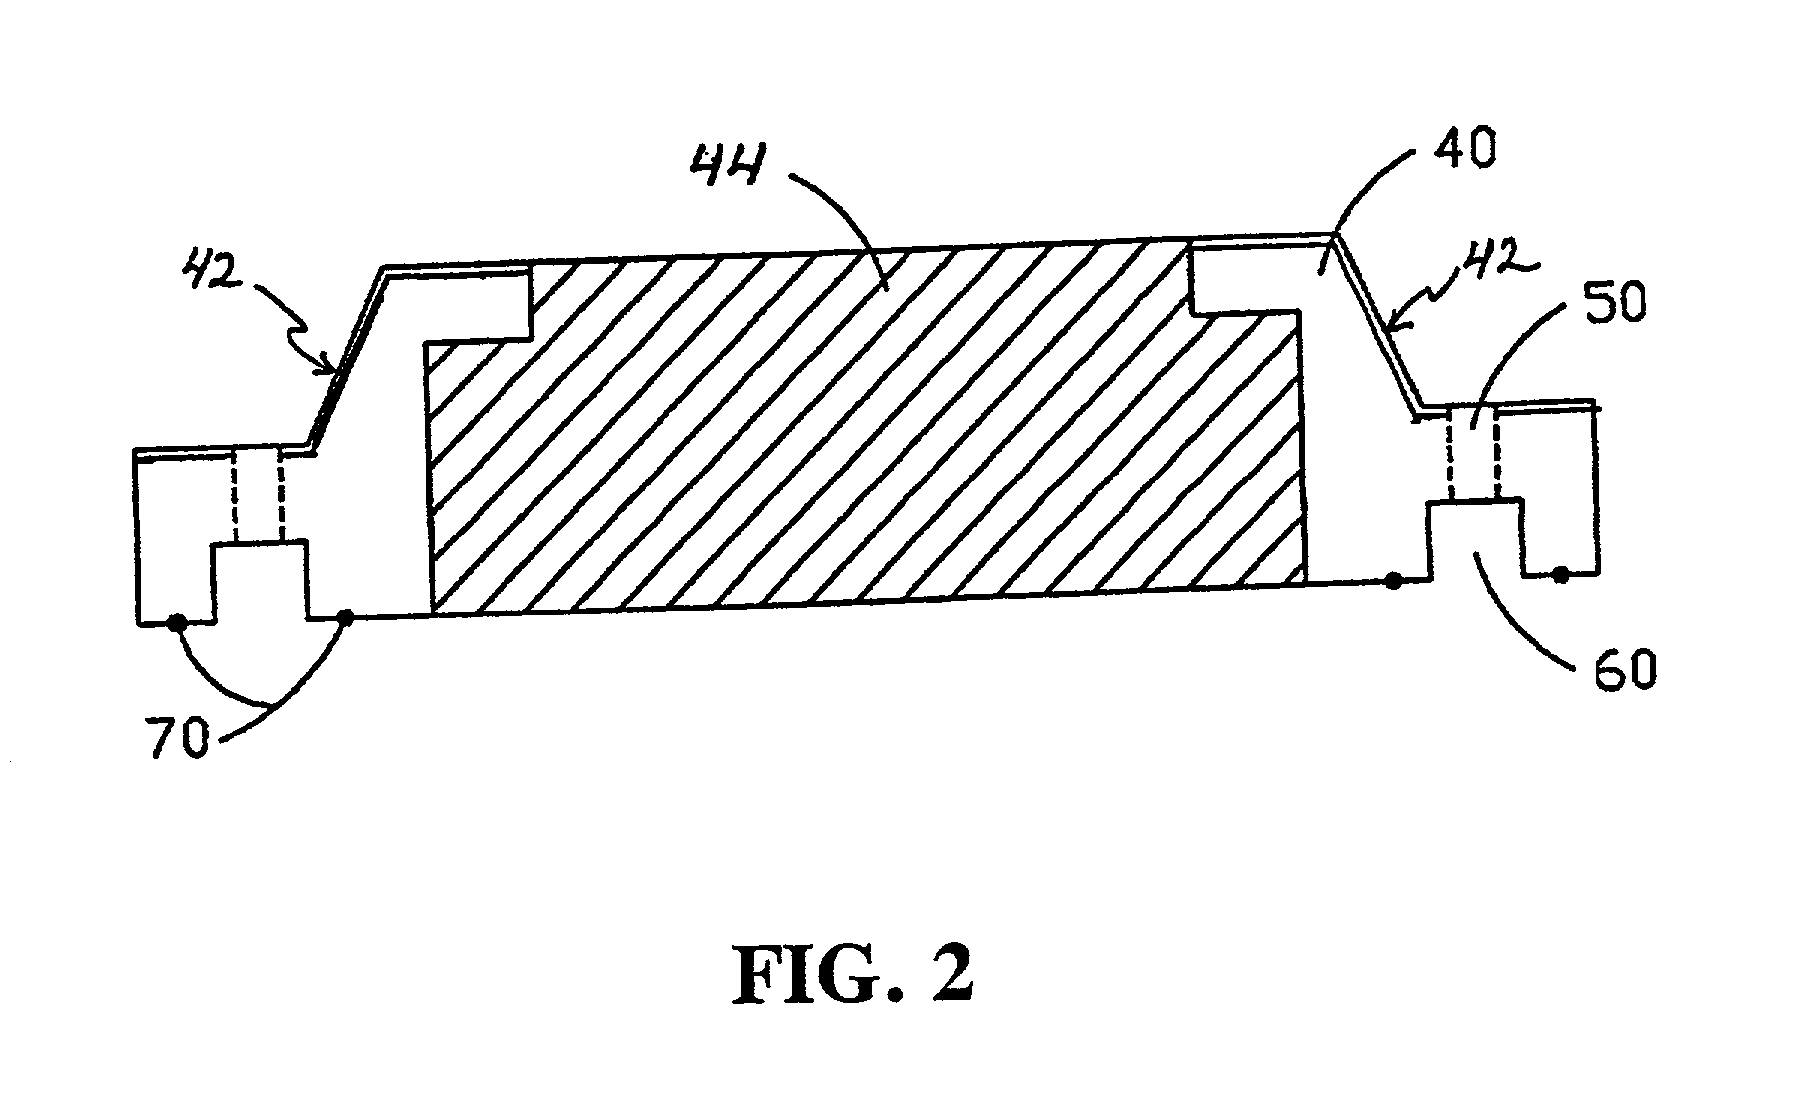 Cerium oxide containing ceramic components and coatings in semiconductor processing equipment and methods of manufacture thereof